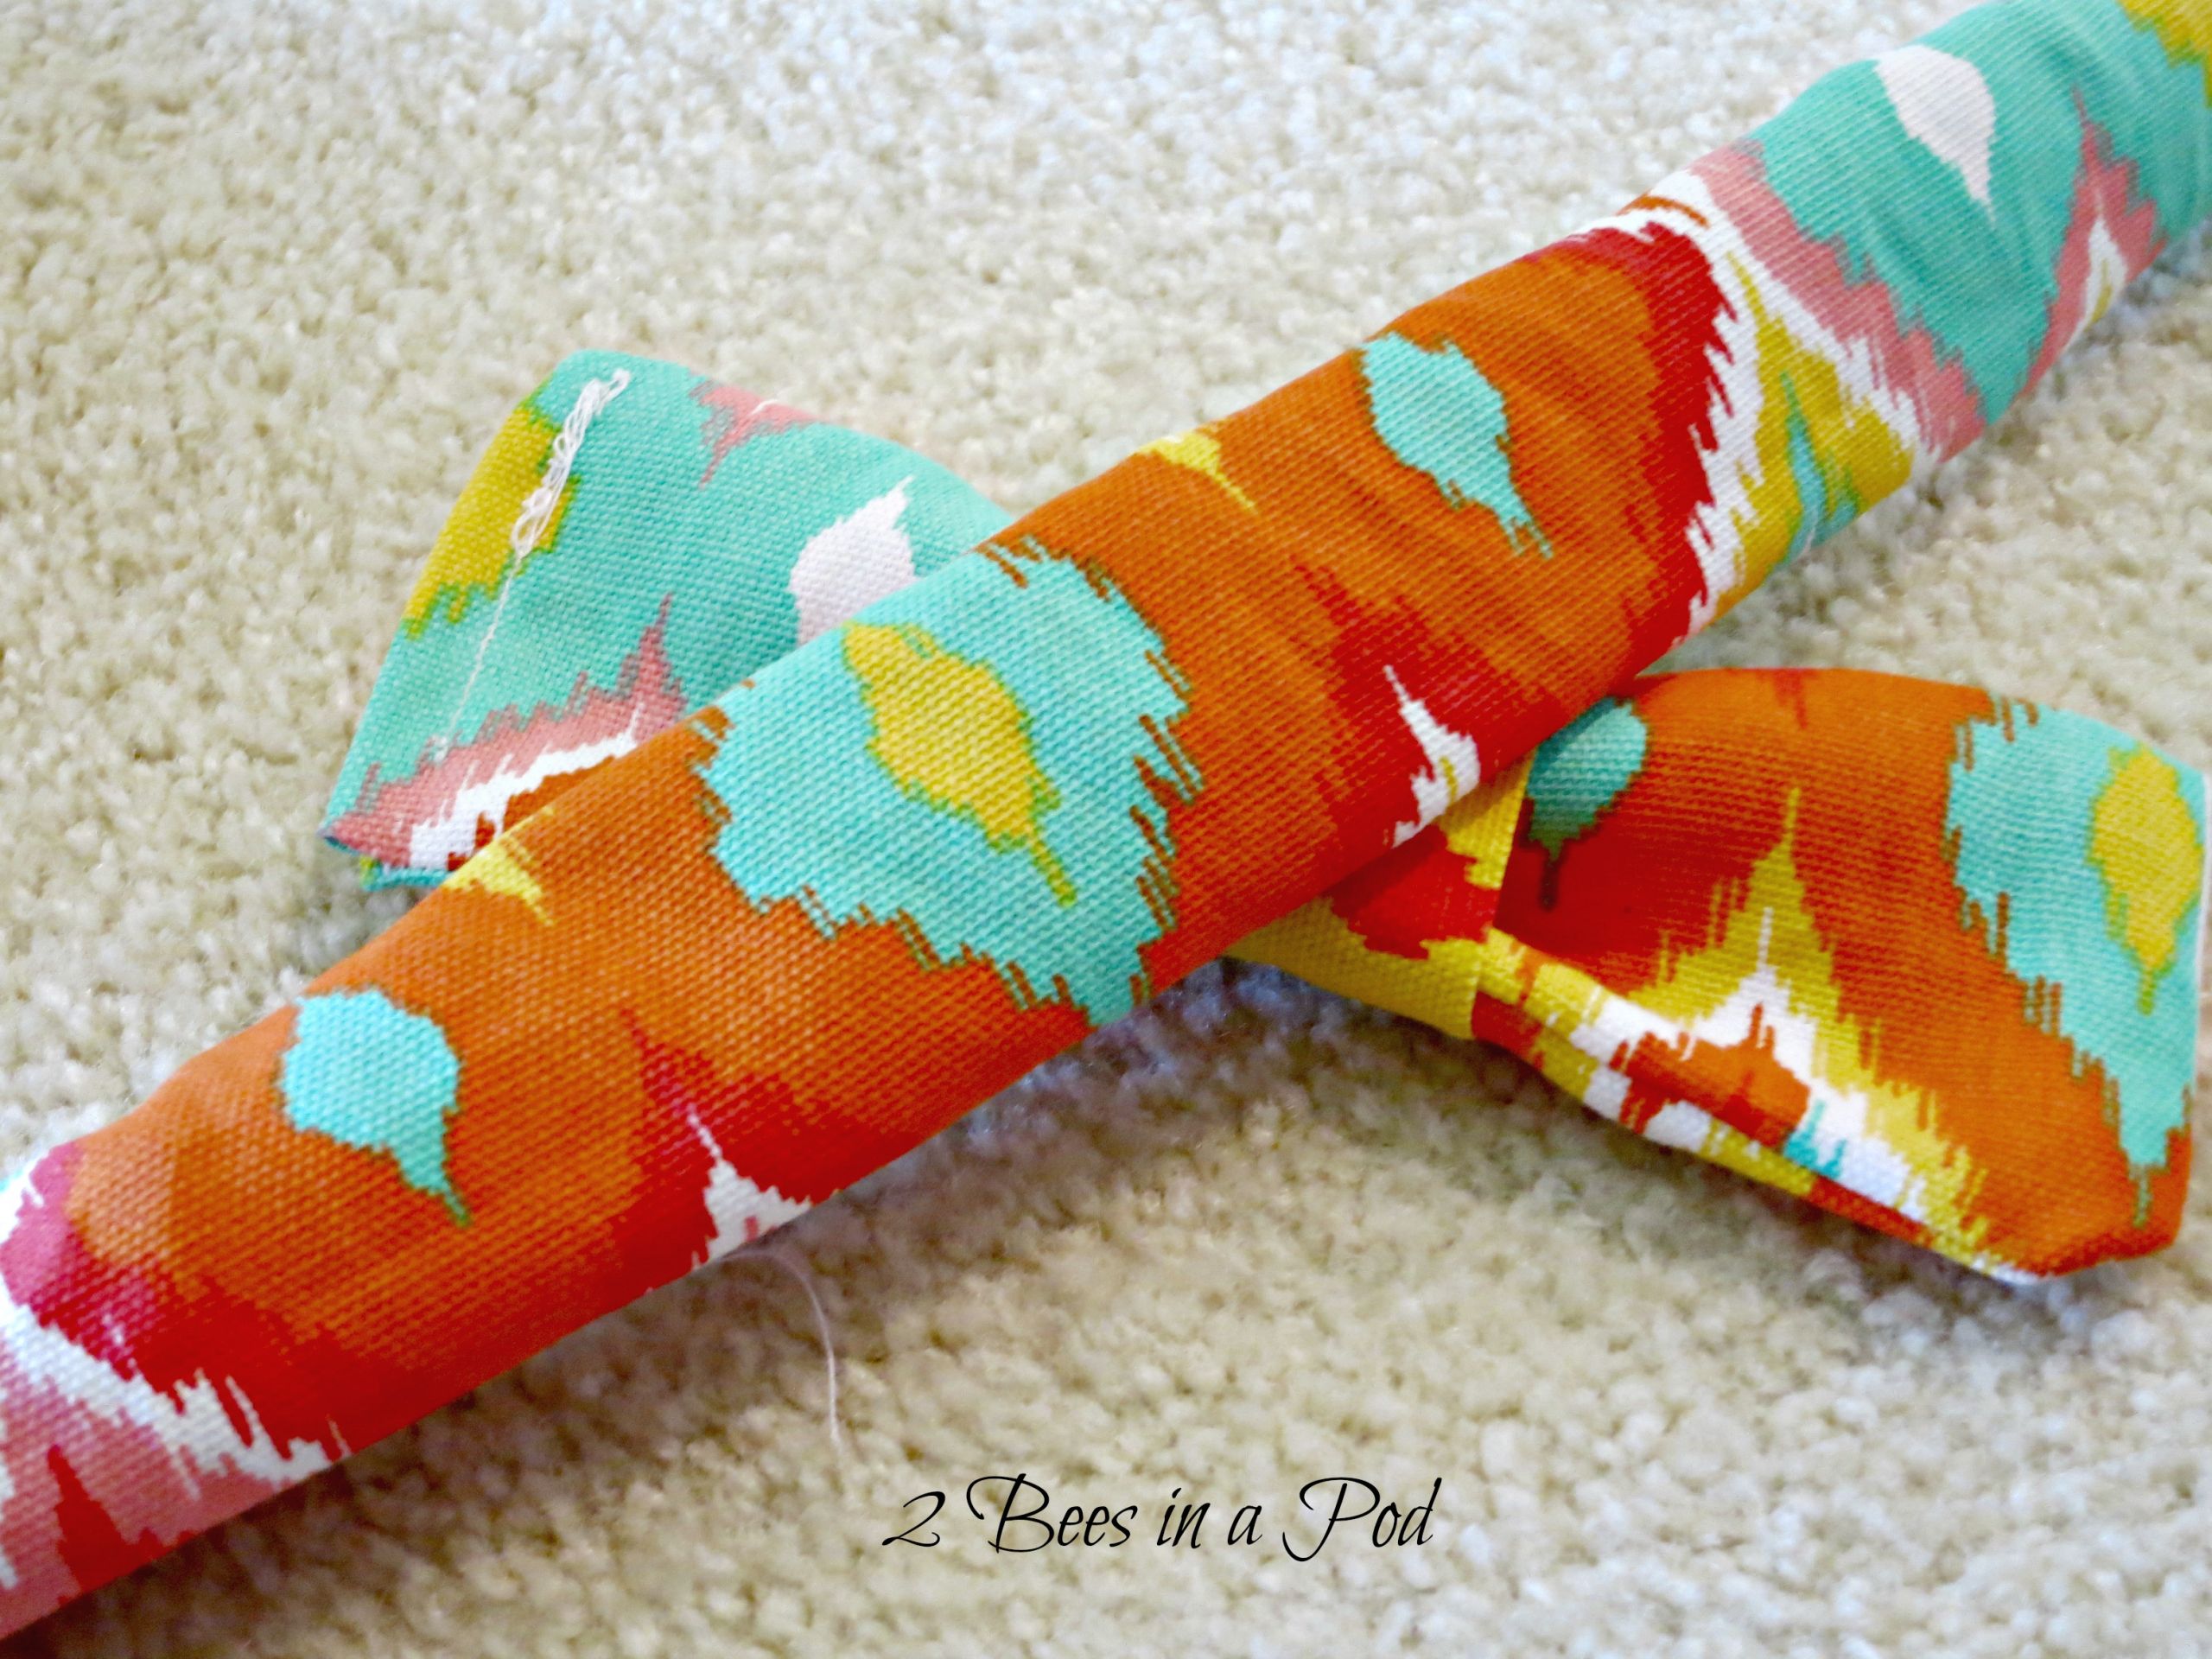 DIY Double Dog Tie Out
 Easy DIY Festive Bow Tie for the Family Dog 2 Bees in